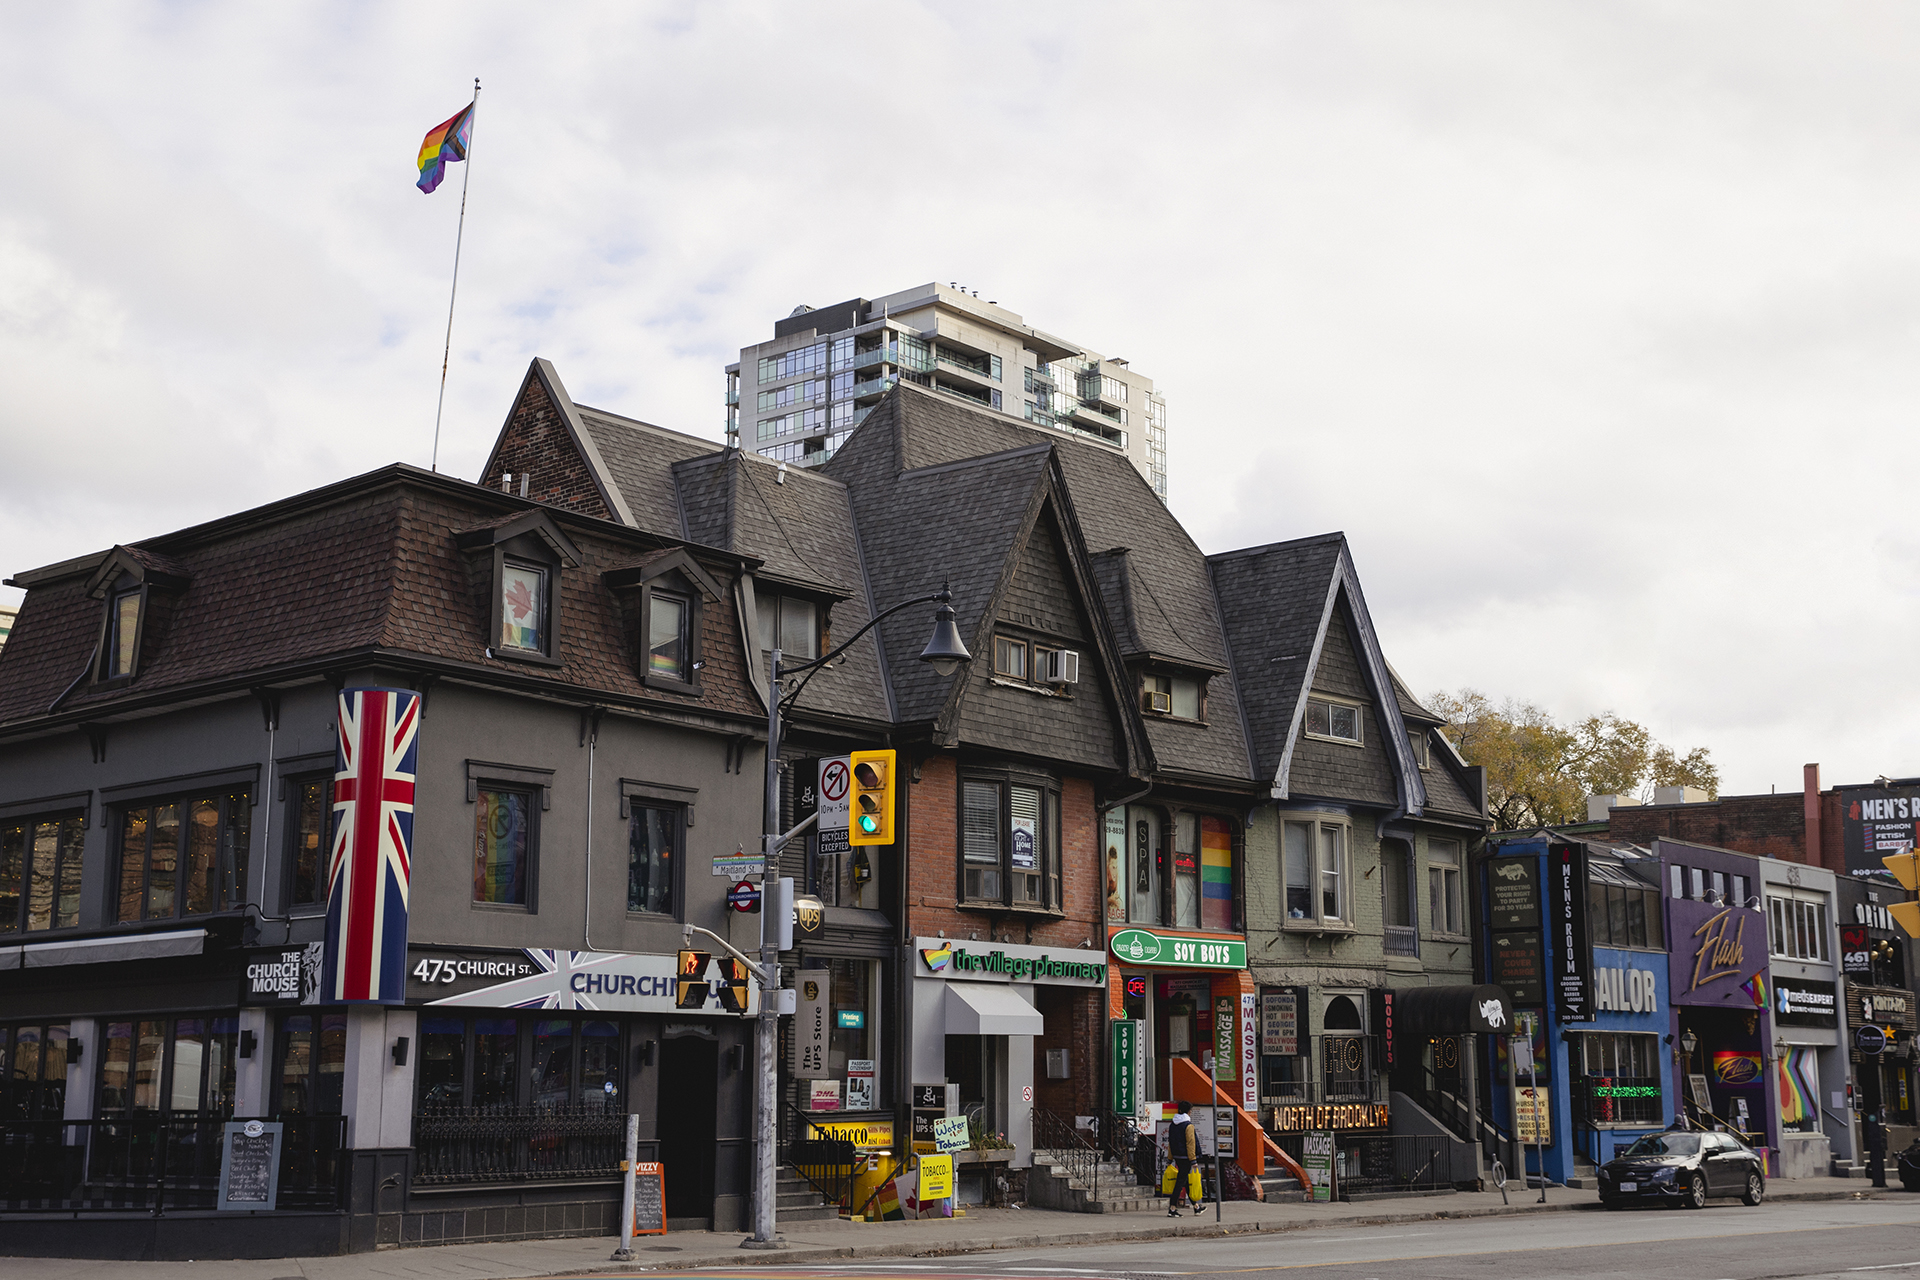 : A series of townhouse-style buildings photographed from across the road. There are numerous colourful signs strewn across the buildings, as well as an LGBTQIA+ flag being flown. The sidewalk in front of the buildings in empty with the exception of one person and one parked card.